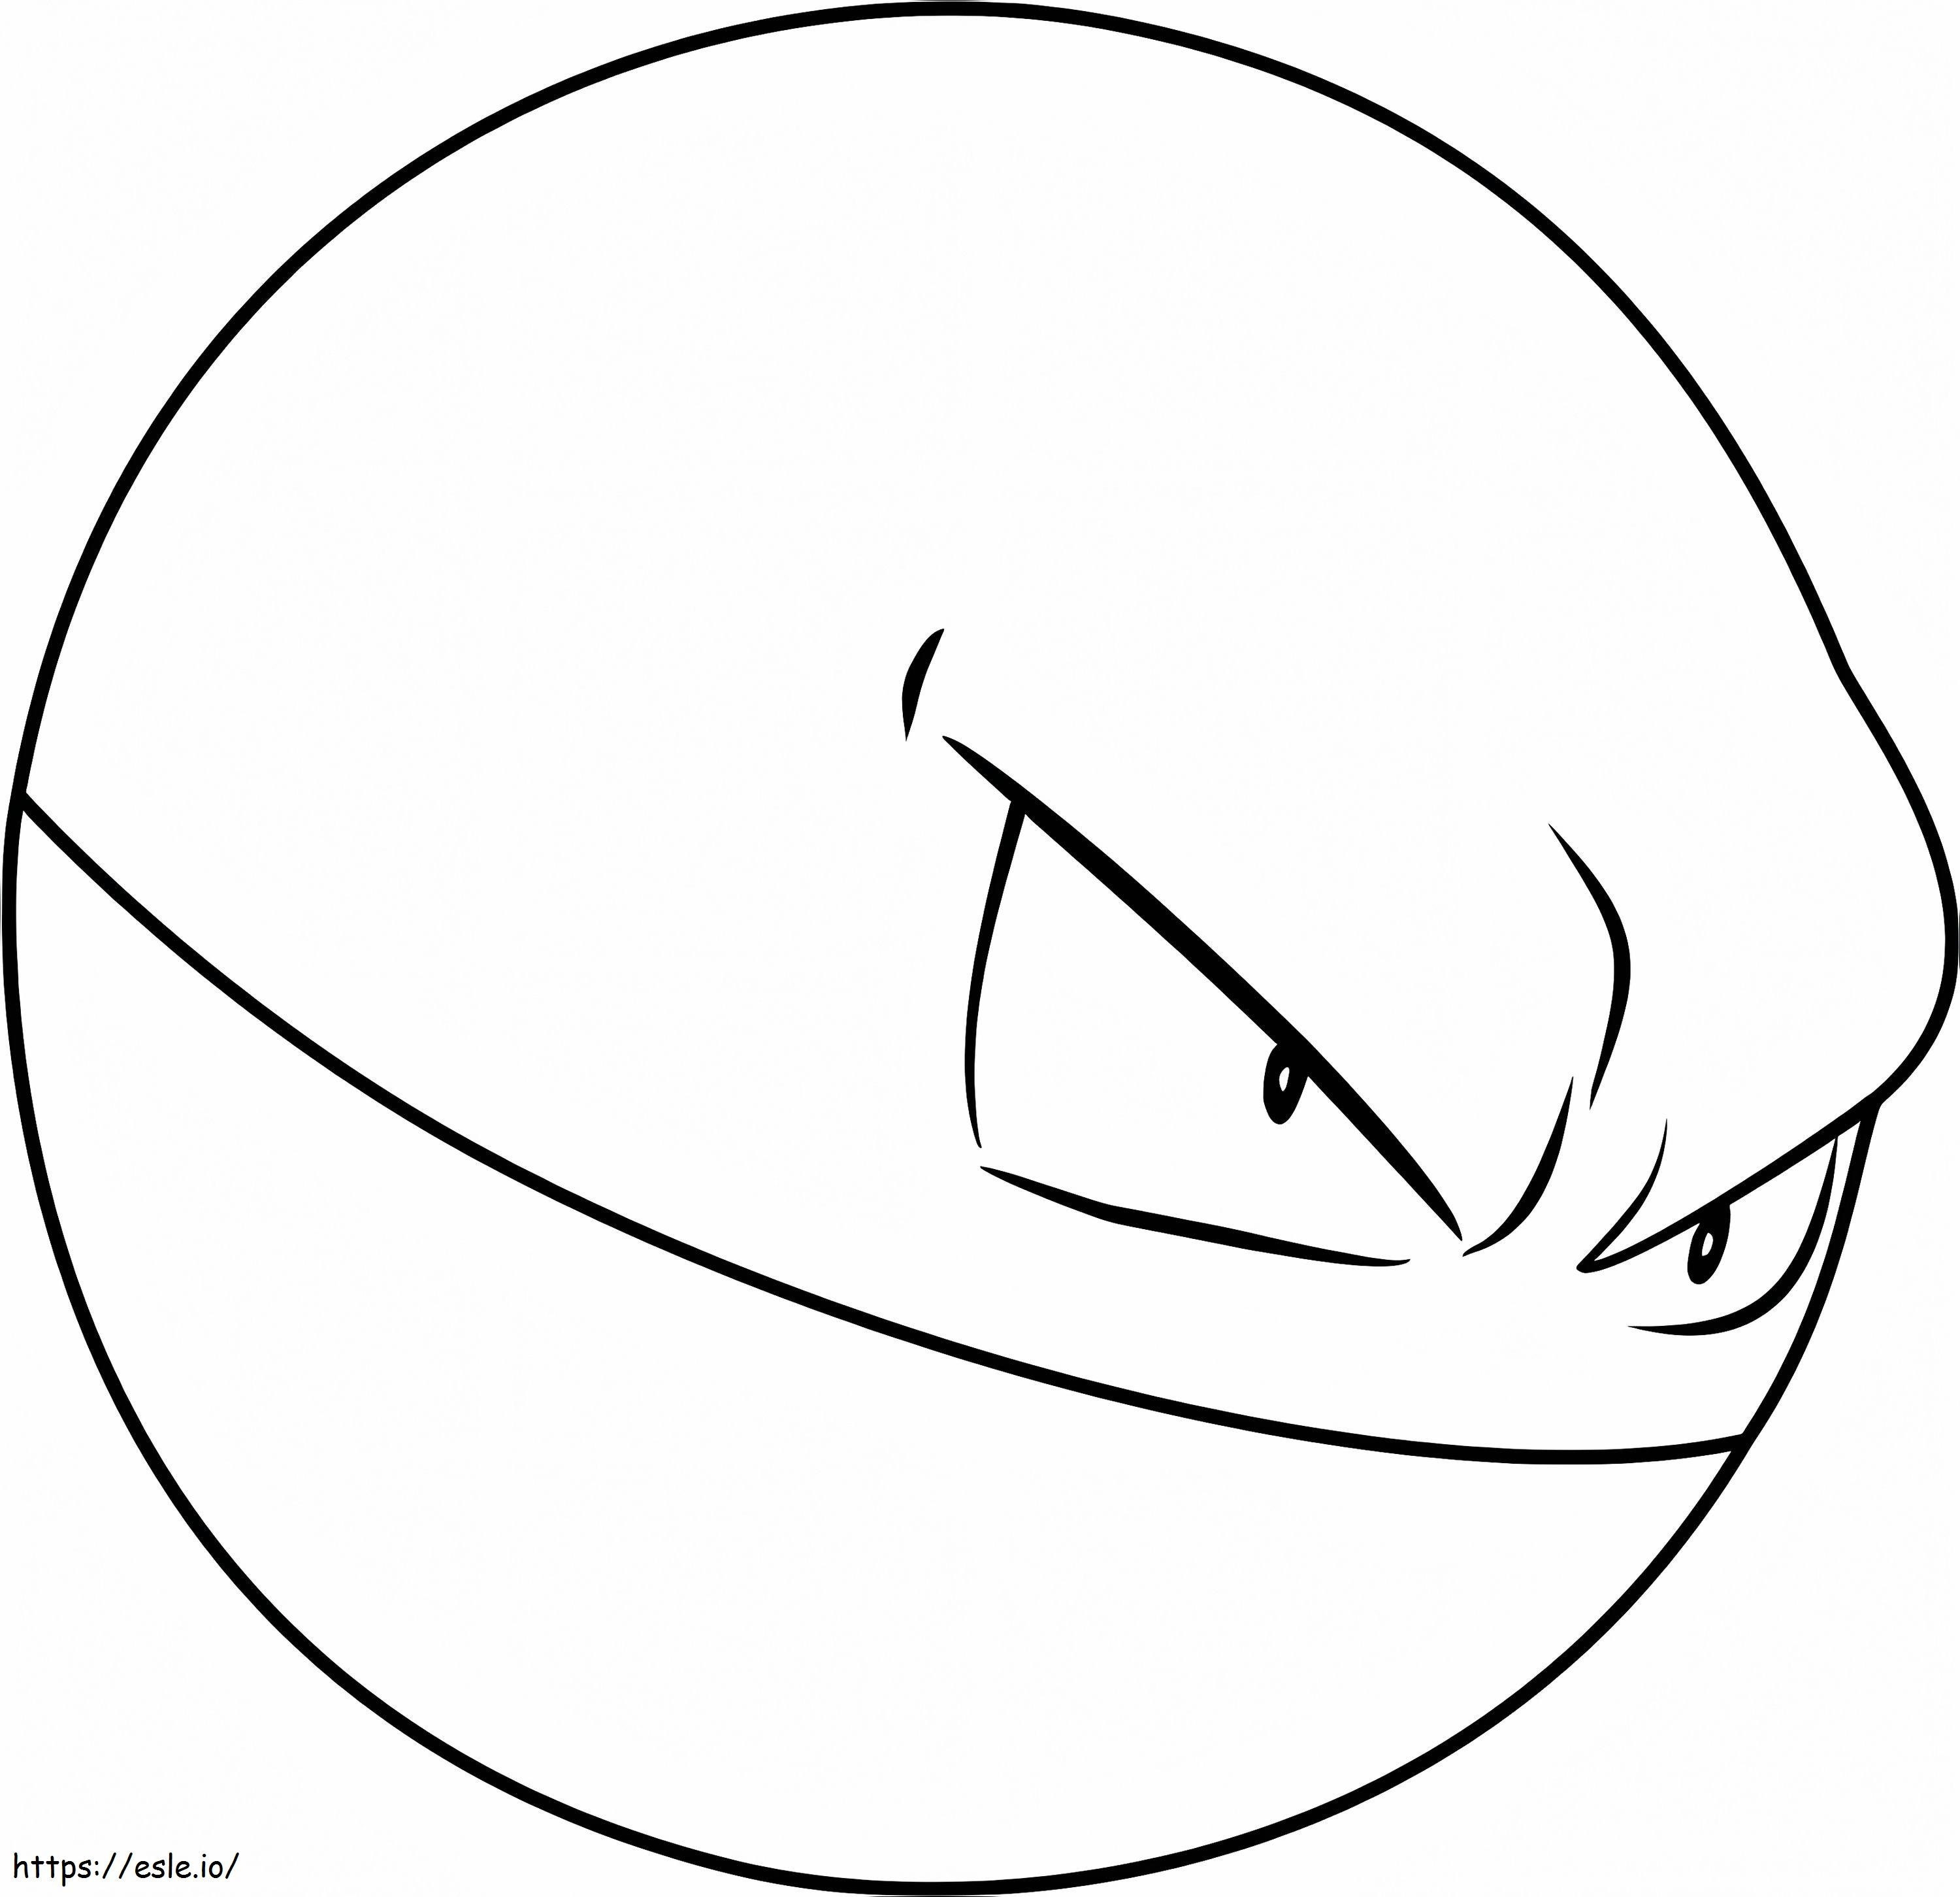 Angry Vole coloring page